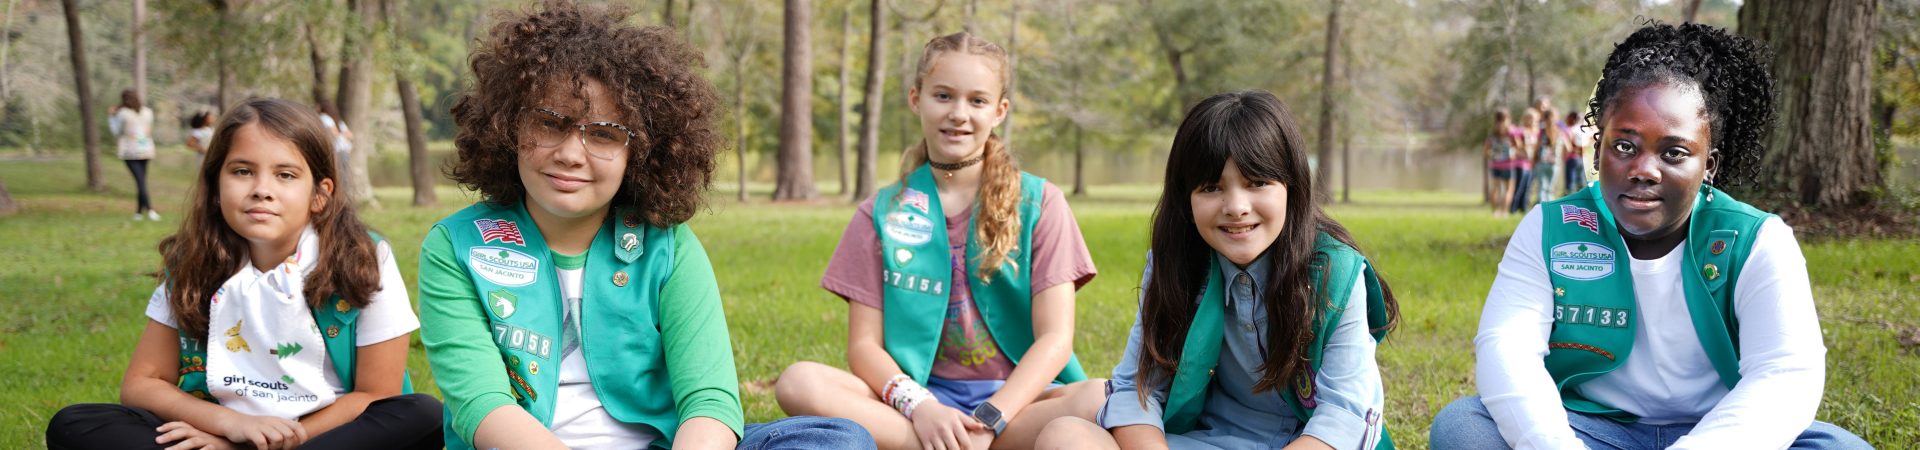  young girls making poster with text that reads action now girl scouts 